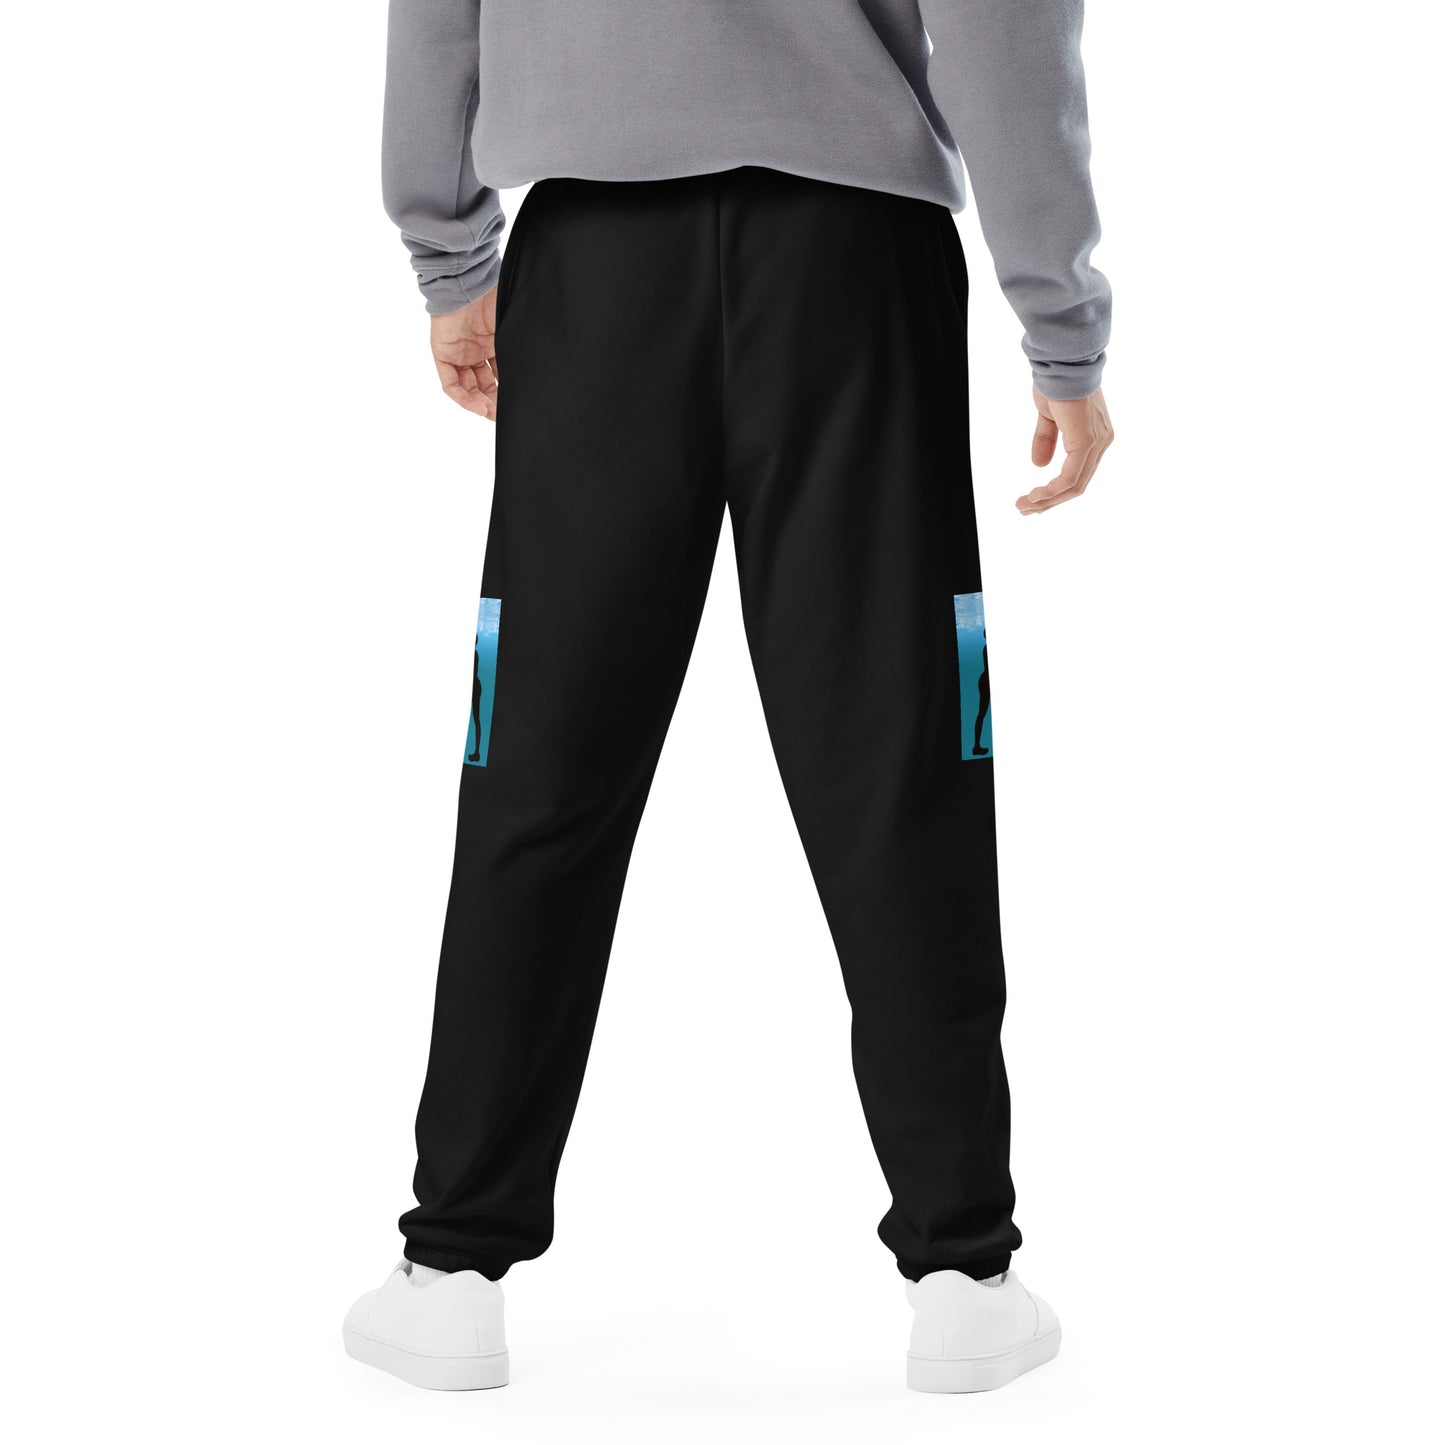 Fade in the Water Unisex Sweatpants